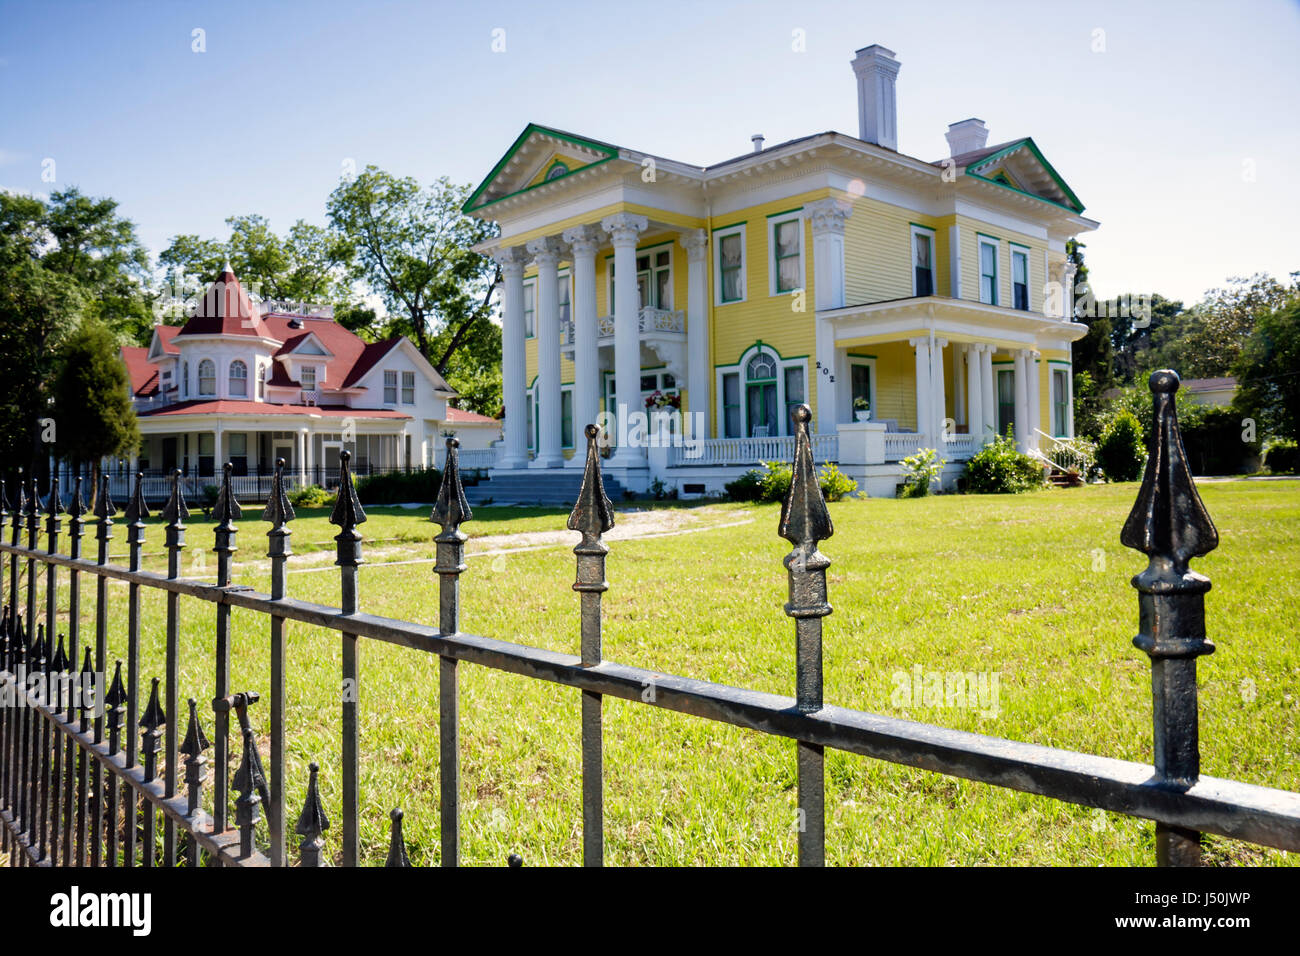 Alabama,Bullock County,Union Springs,historic home,Powell Street,preservation,Rainer Lewis house,houses,1904,Neo Classical Revival,portico,Corinthian Stock Photo